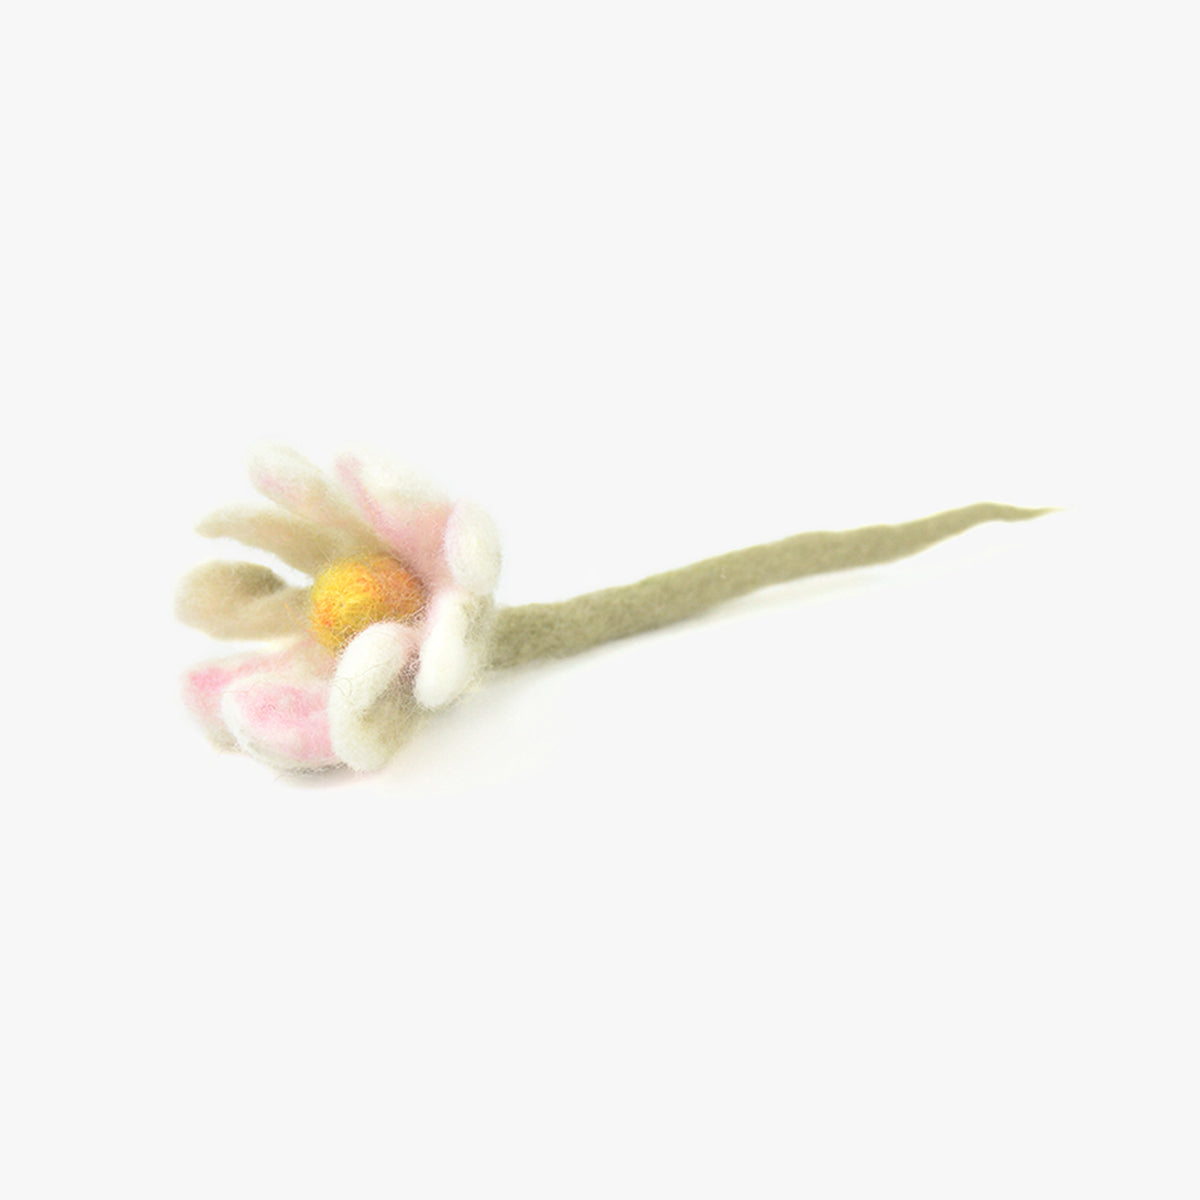 Stylecats Felt Cat Toy, Realistic Daisy Flower | at Made Moggie